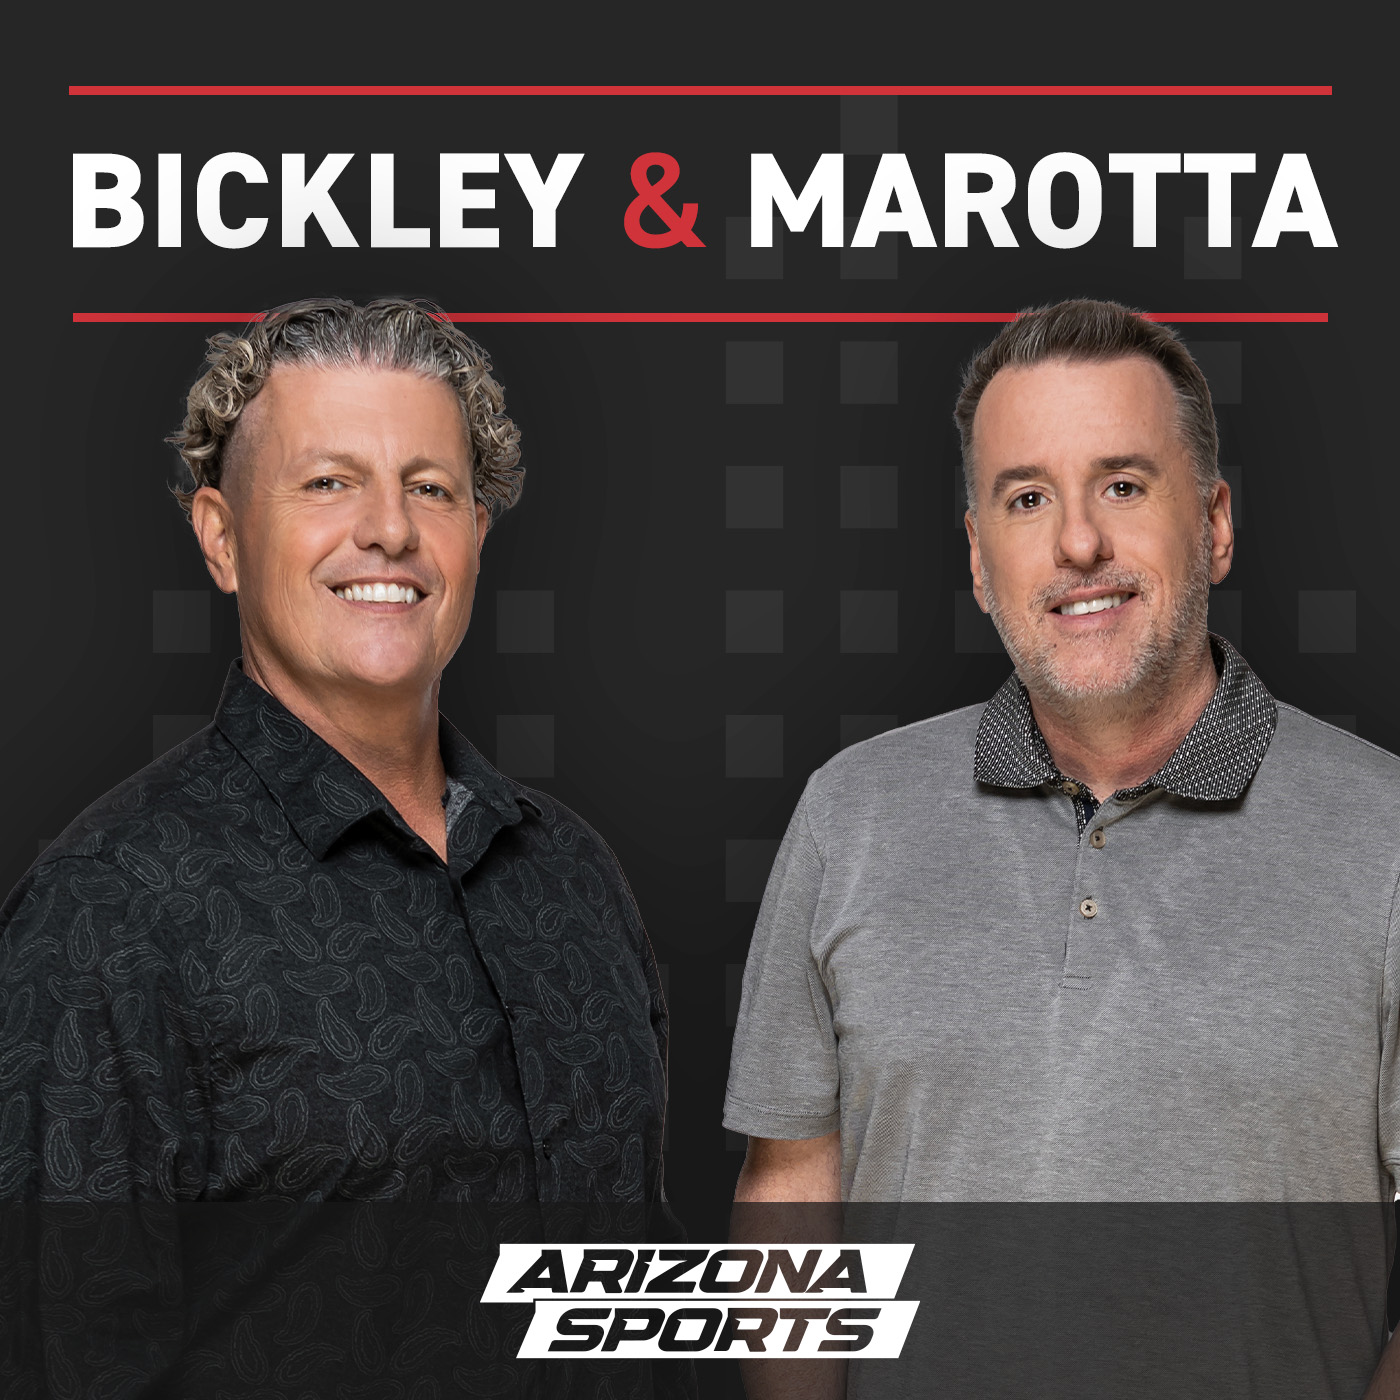 Bickley+Marotta talk about the rise of Kyler Murray